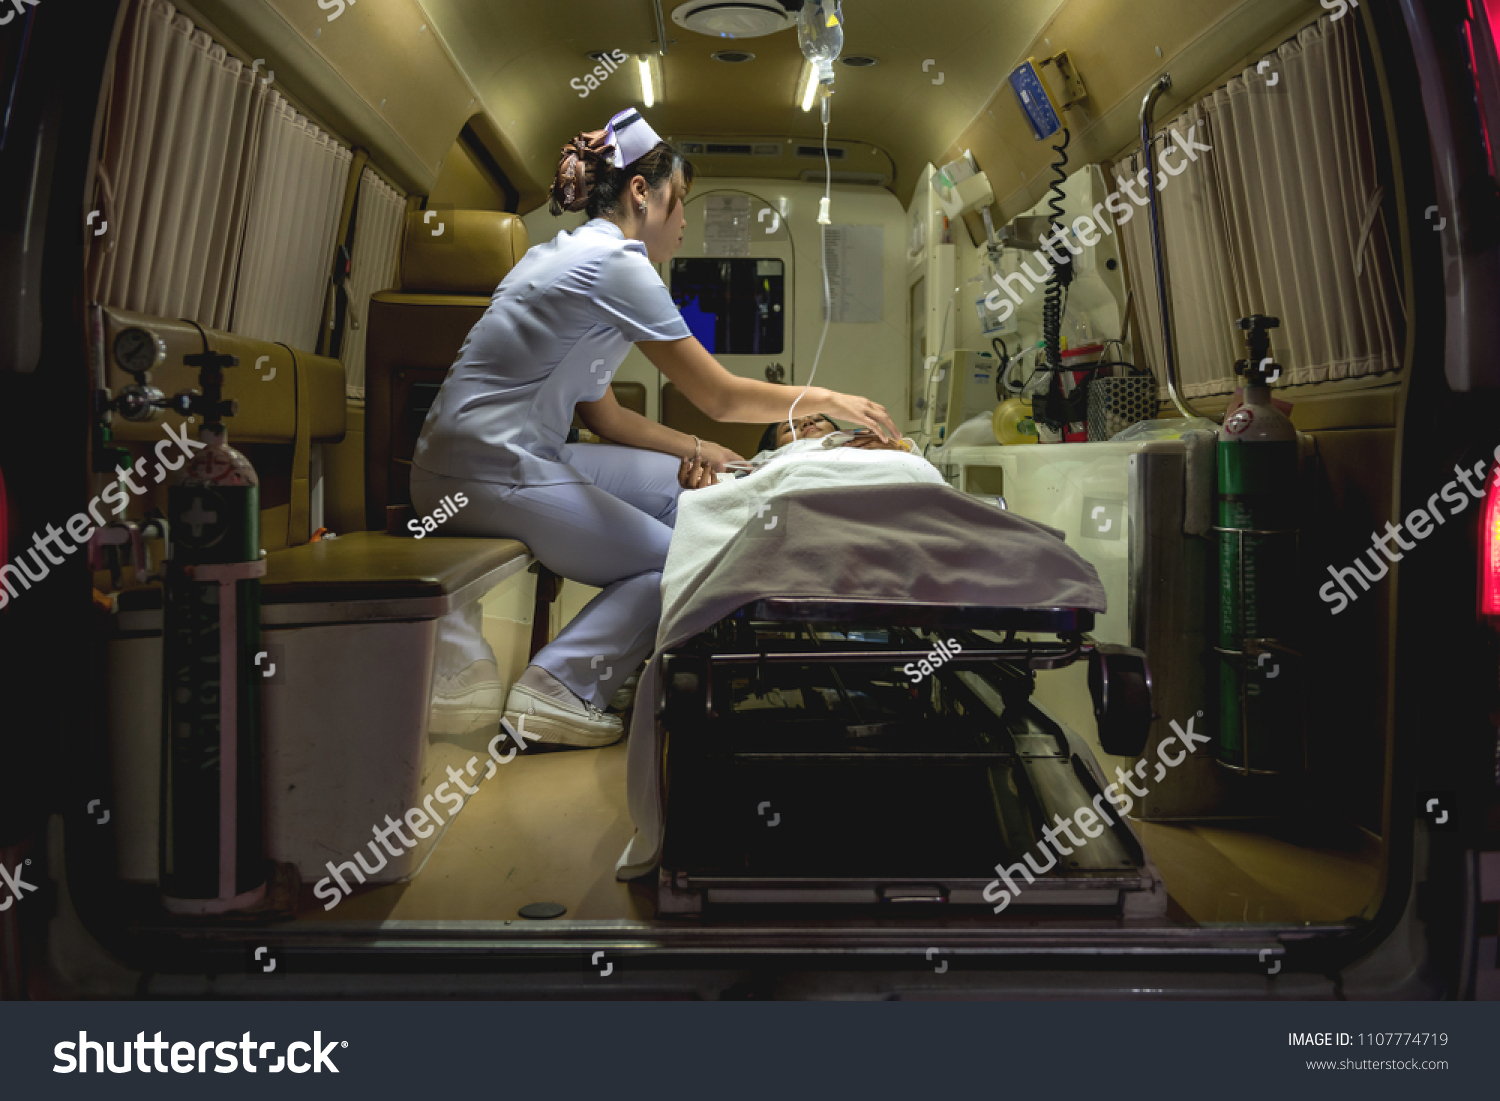 Nurse with patient. Young chinese nurse with her emergency patient in ambulence taking care of her patient. Real ambulence in hospital. Medical concept. #1107774719